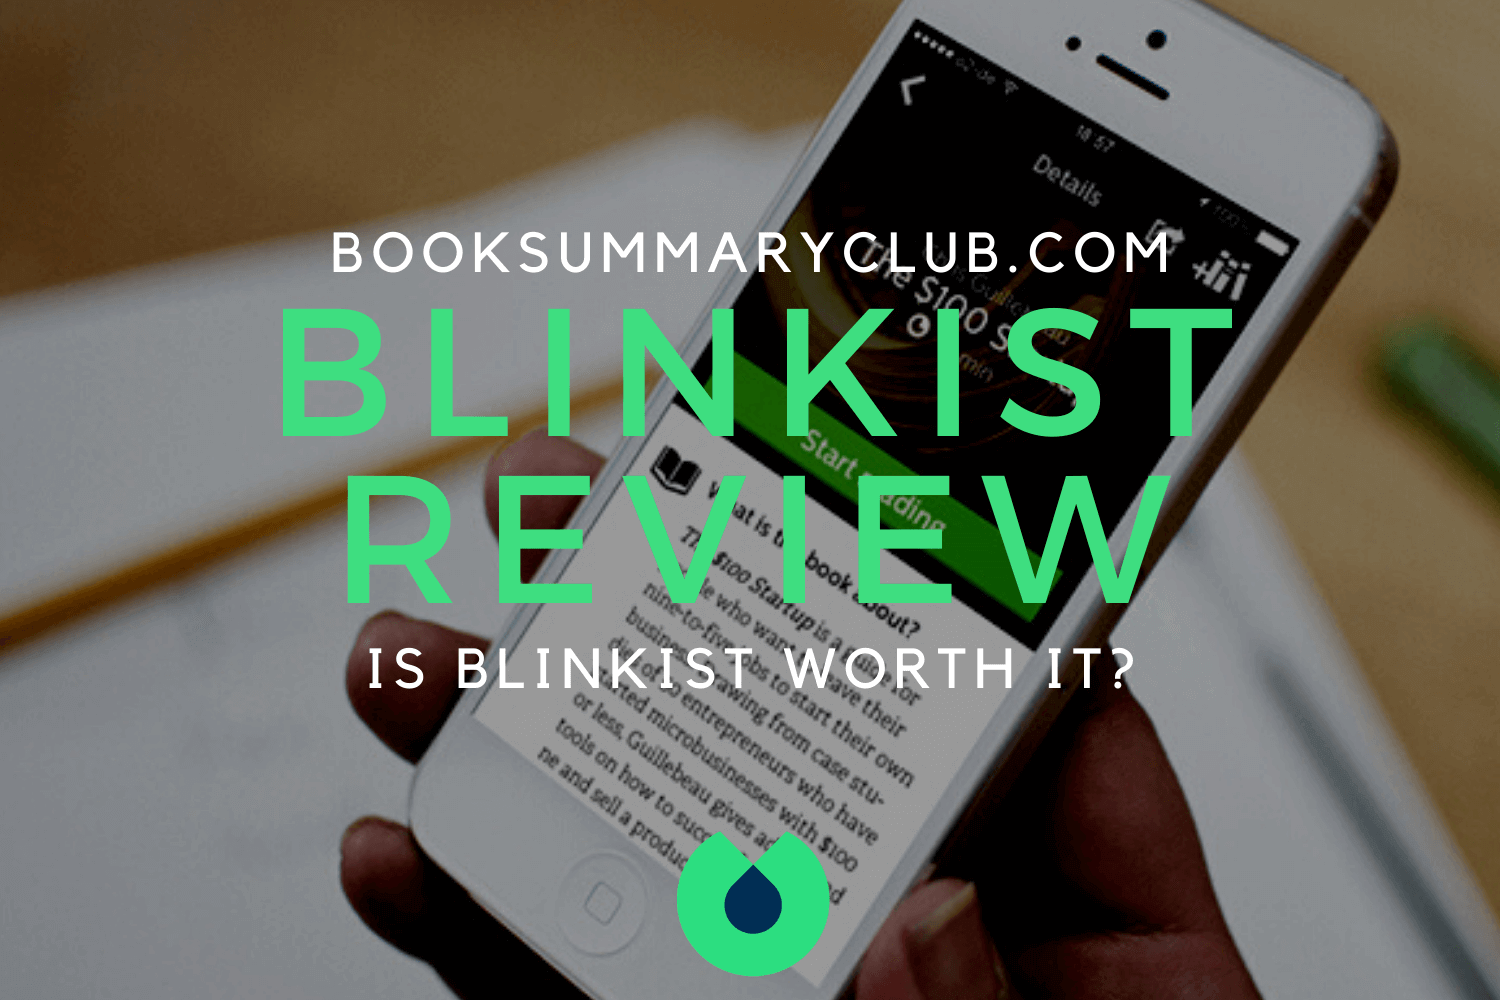 Blinkist Premium Discount: Save 50% on Your Subscription to listen to  thousands of book summaries in just 15 minutes.